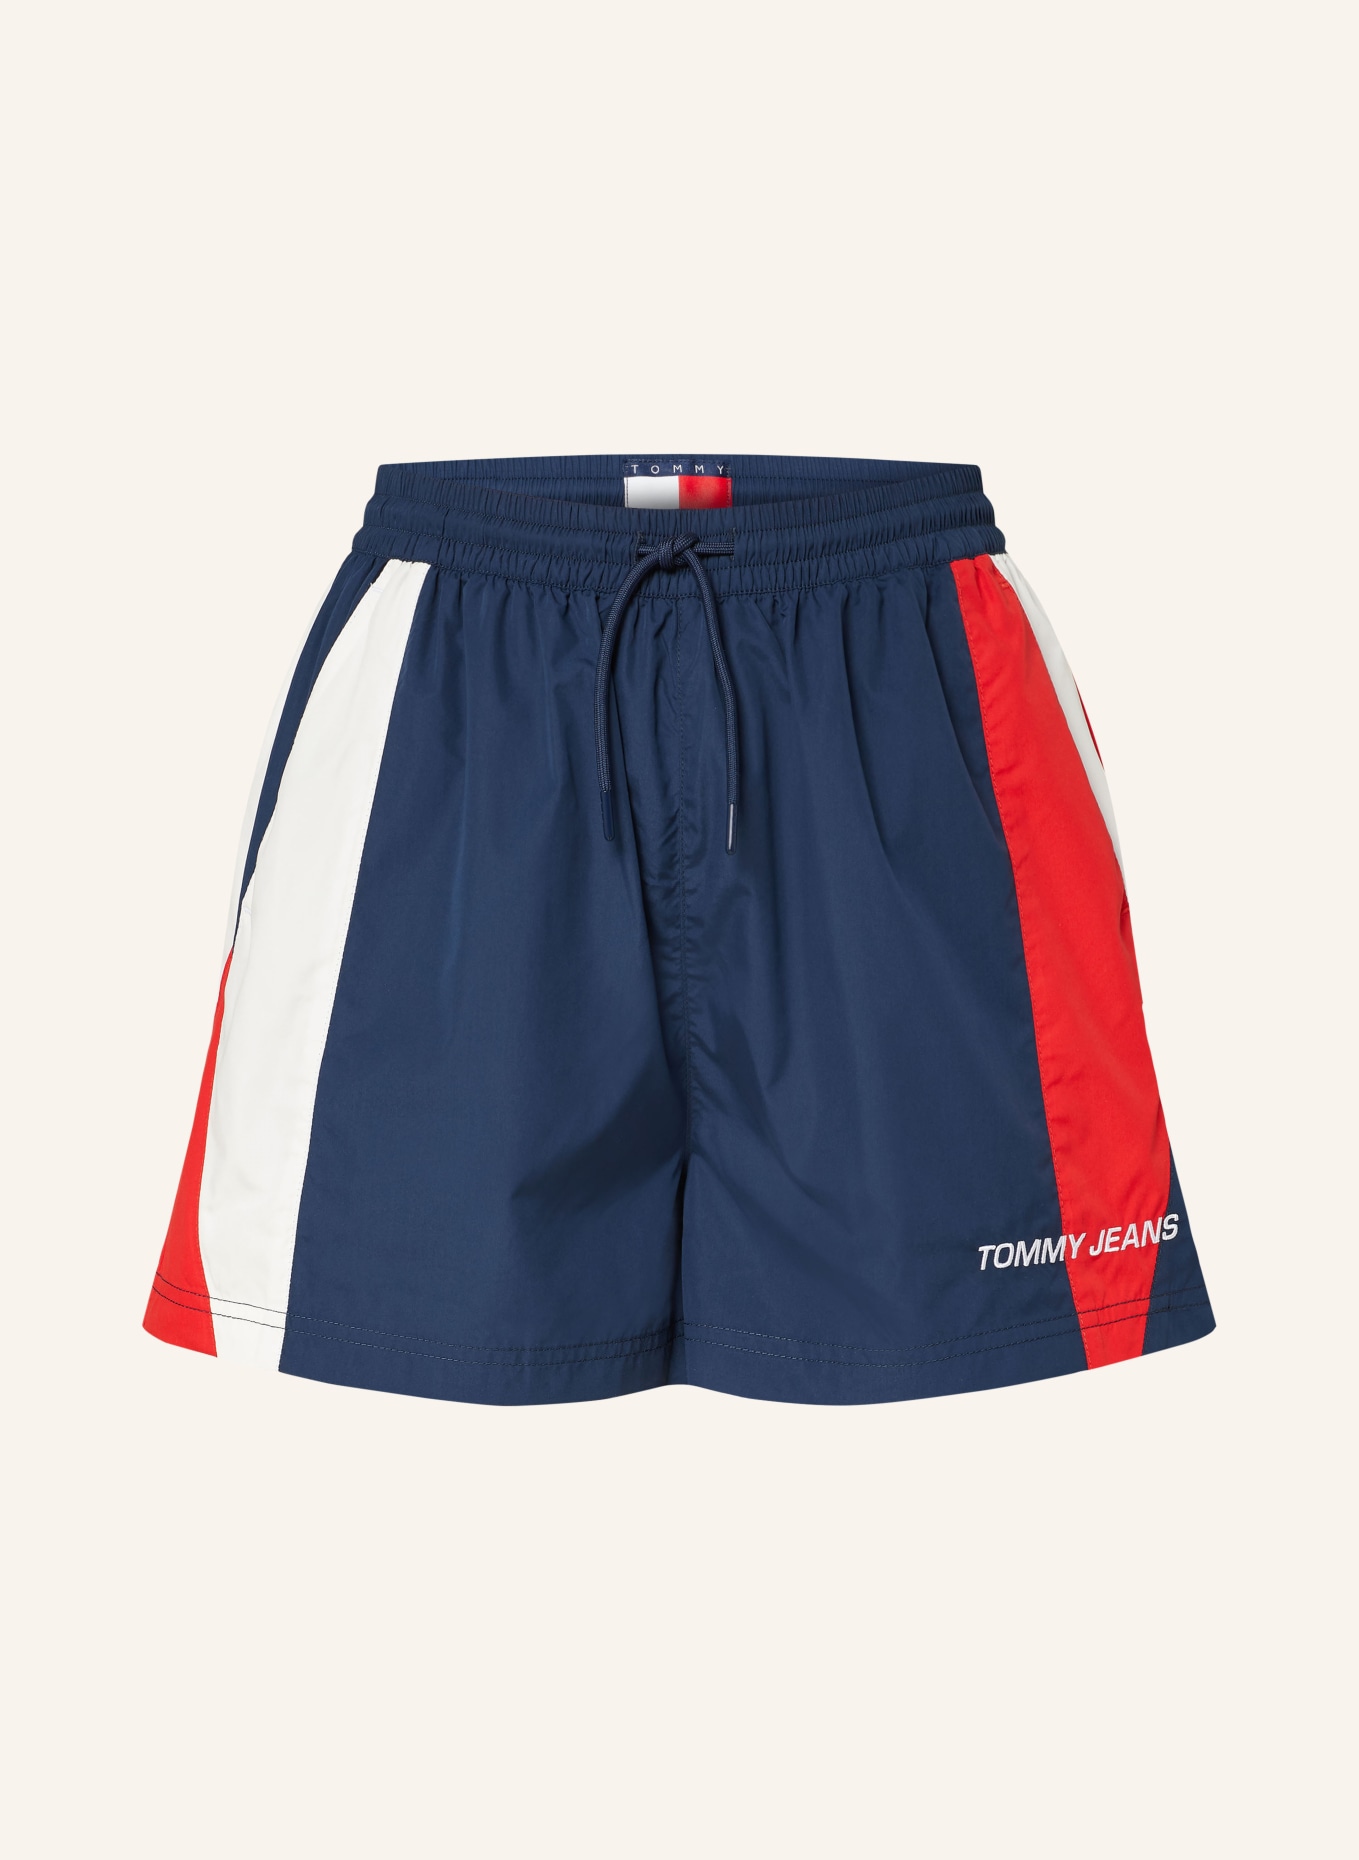 TOMMY JEANS Shorts, Color: DARK BLUE/ WHITE/ RED (Image 1)